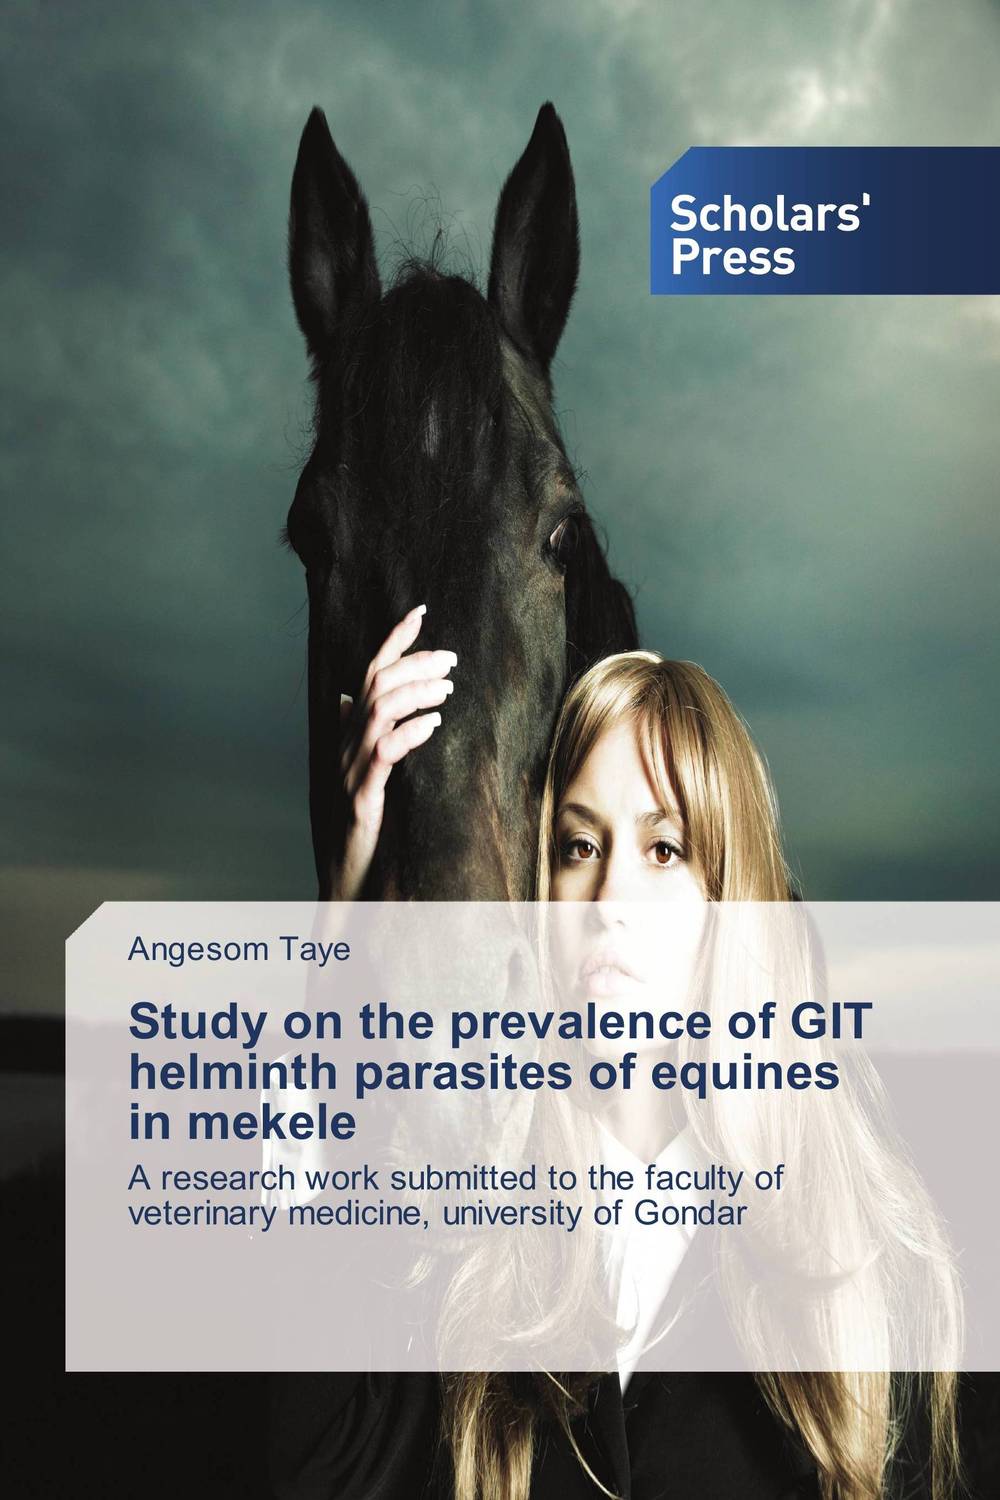 Study on the prevalence of GIT helminth parasites of equines in mekele